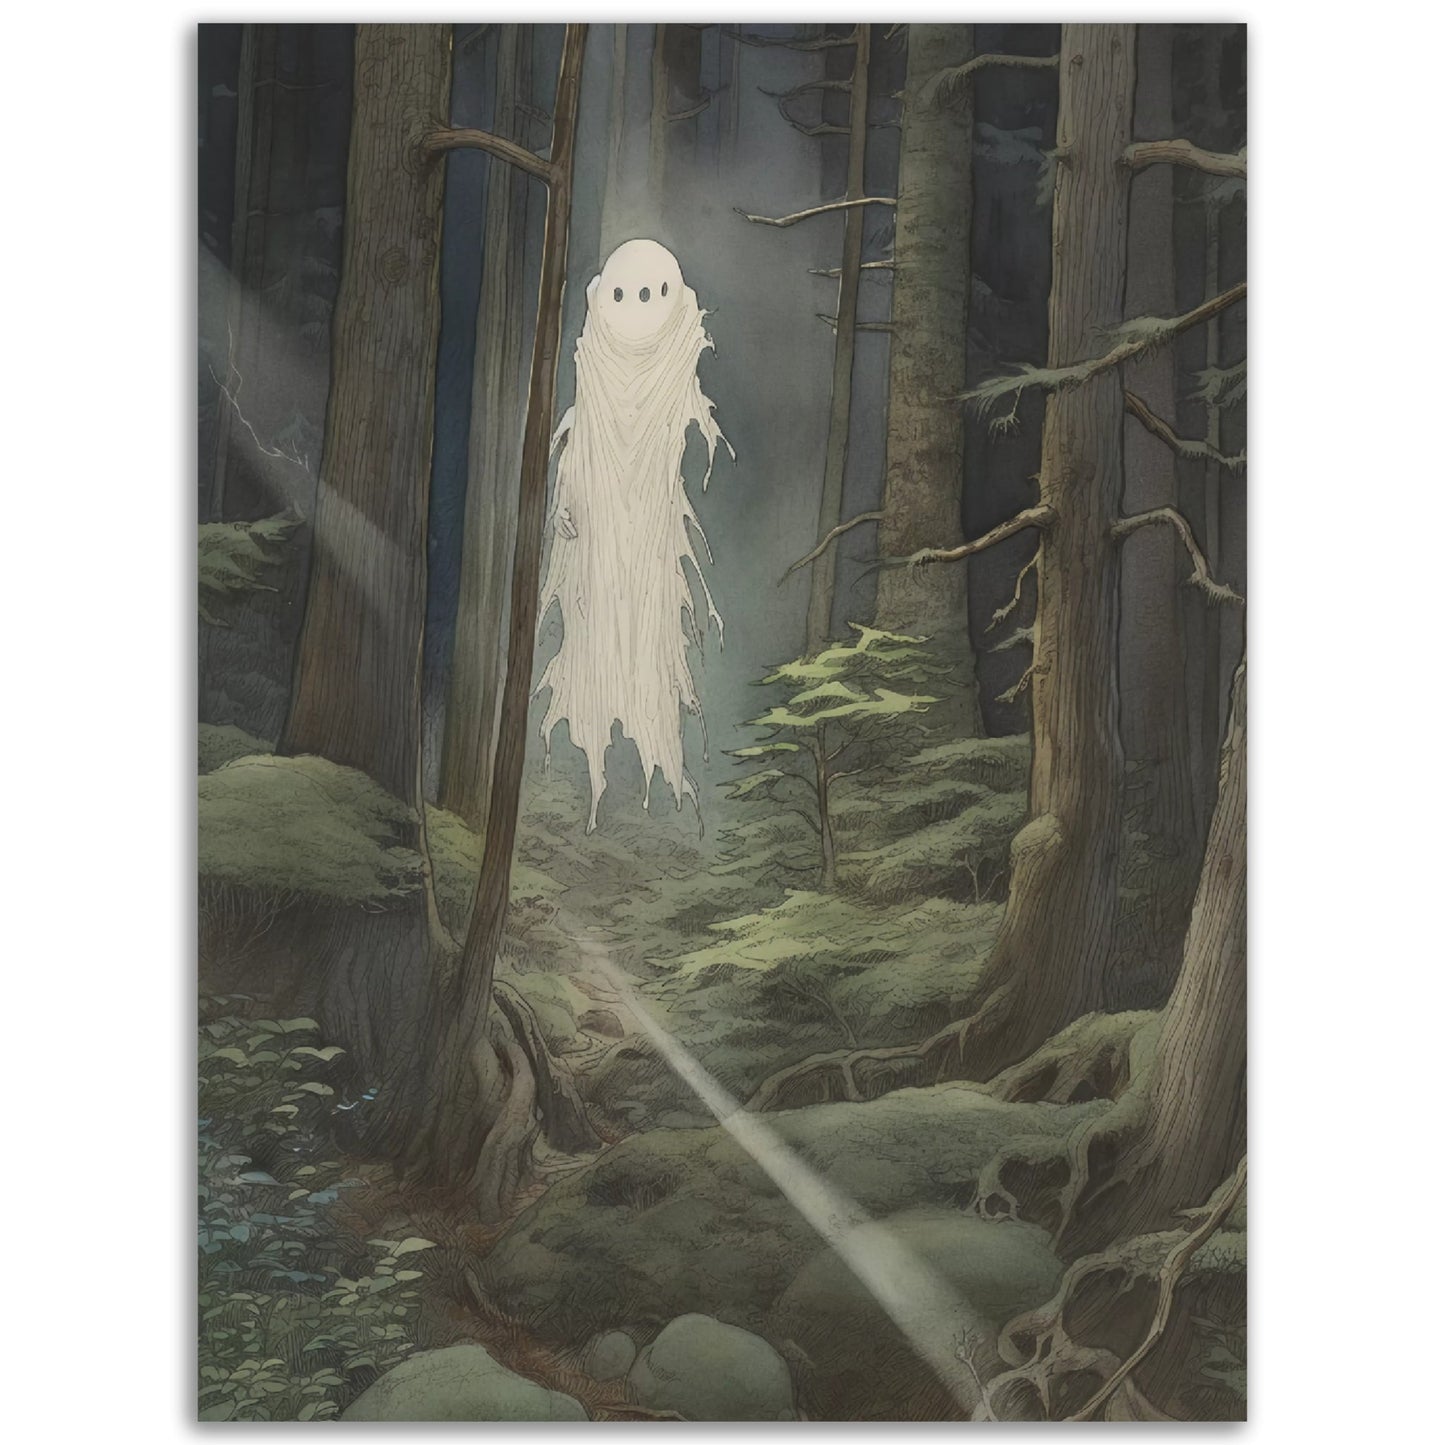 Description: A haunting poster of a Kodama Forest Spirit 4 gracefully lurking amidst a wooded landscape. Perfect for adding a touch of whimsical mystique to any room decor or poster wall art collection.